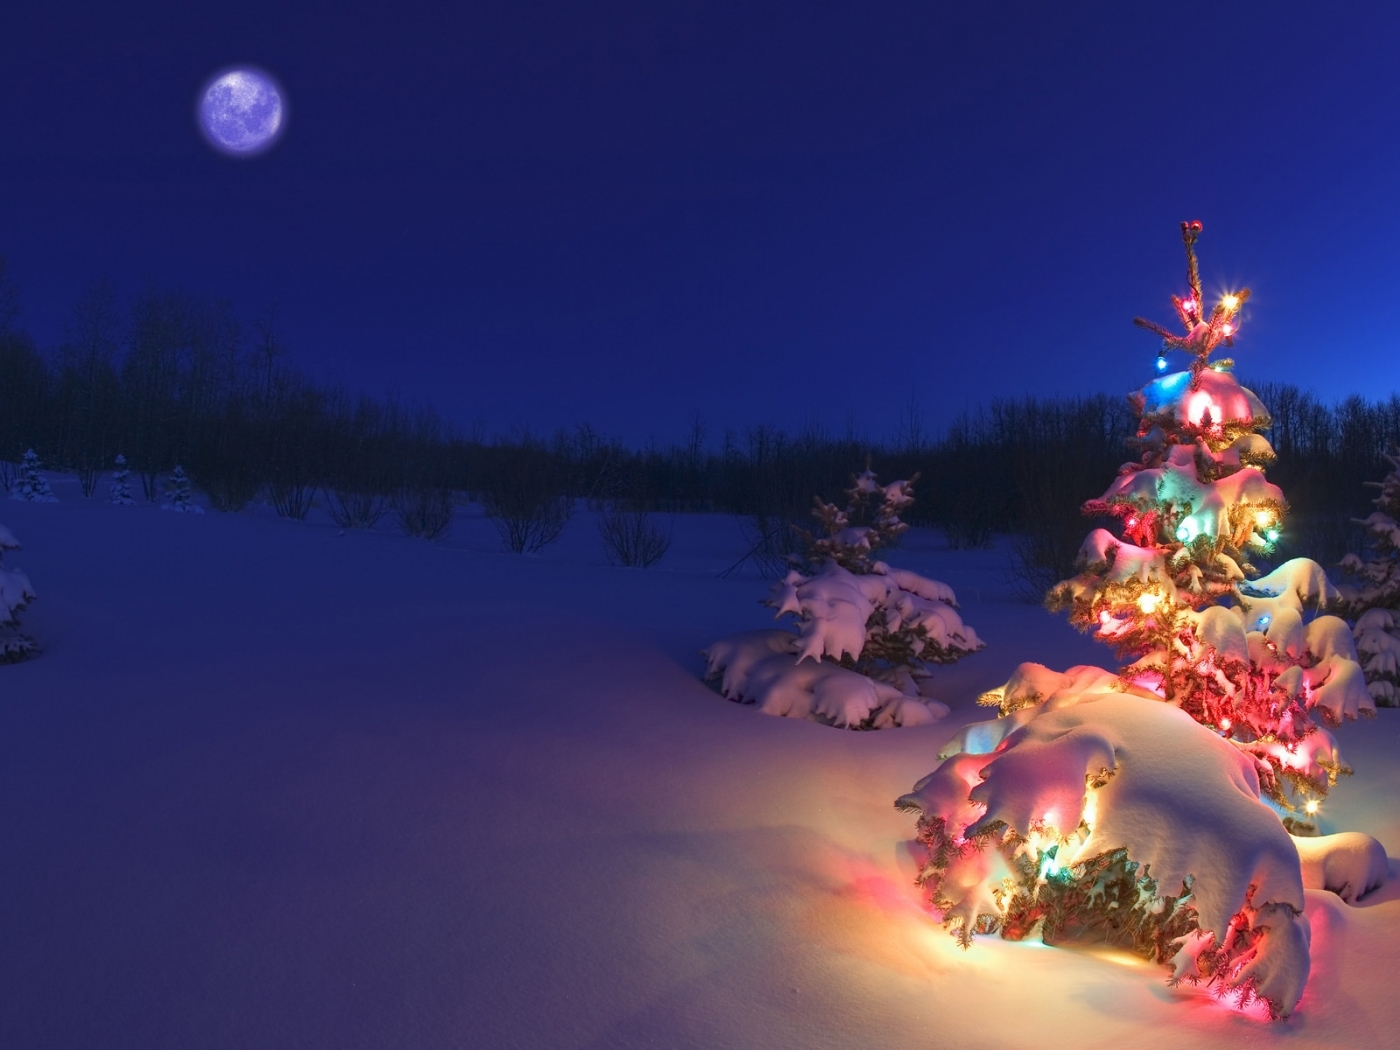 android holidays, new year, snow, fir trees, blue